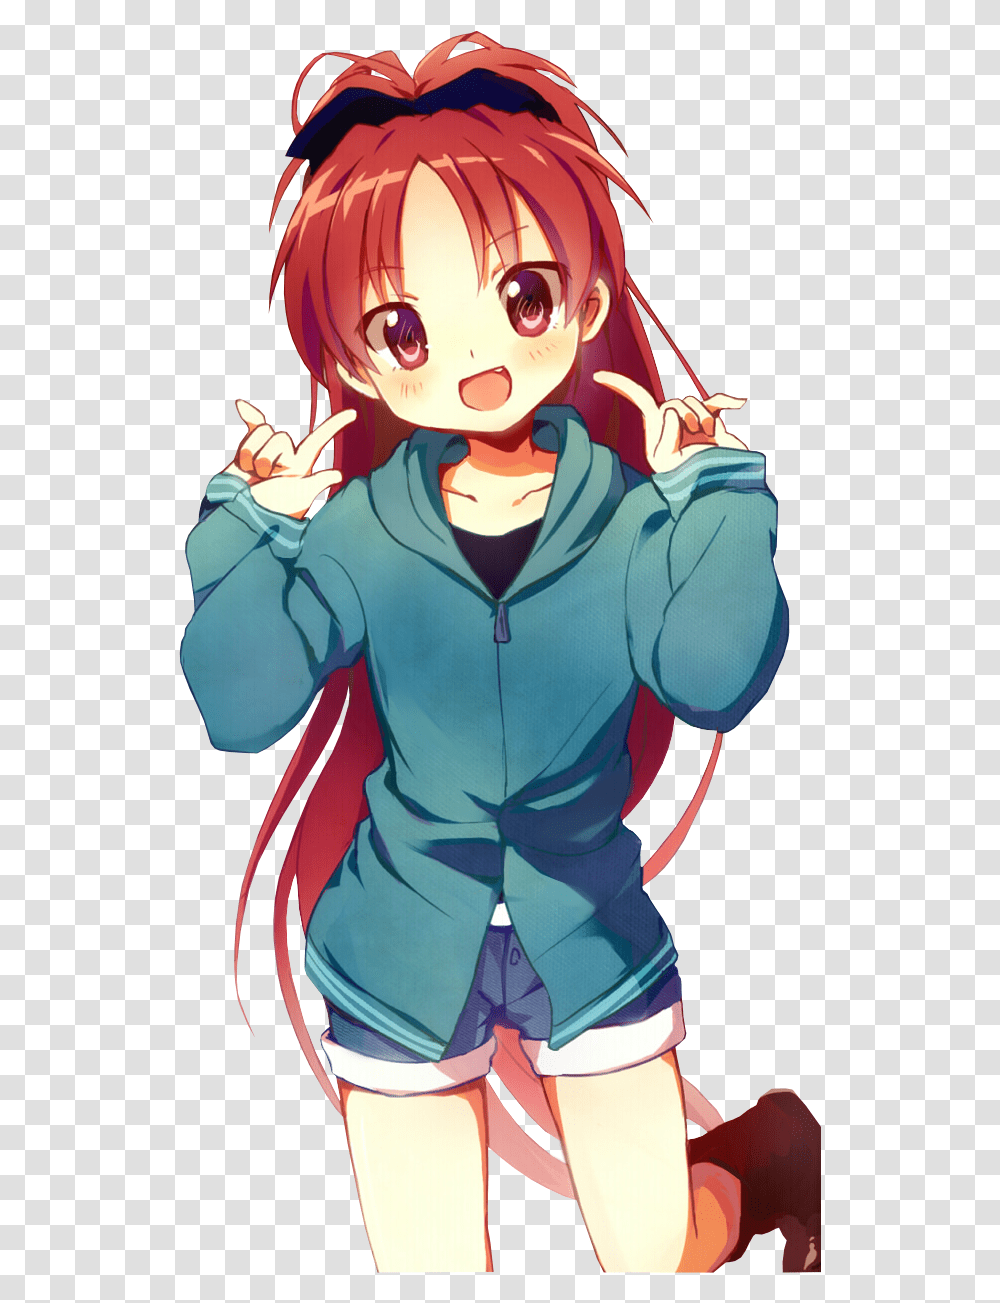 Little Red Haired Anime Girl Download Little Anime Girl With Red Hair And Red Eyes, Comics, Book, Manga, Person Transparent Png